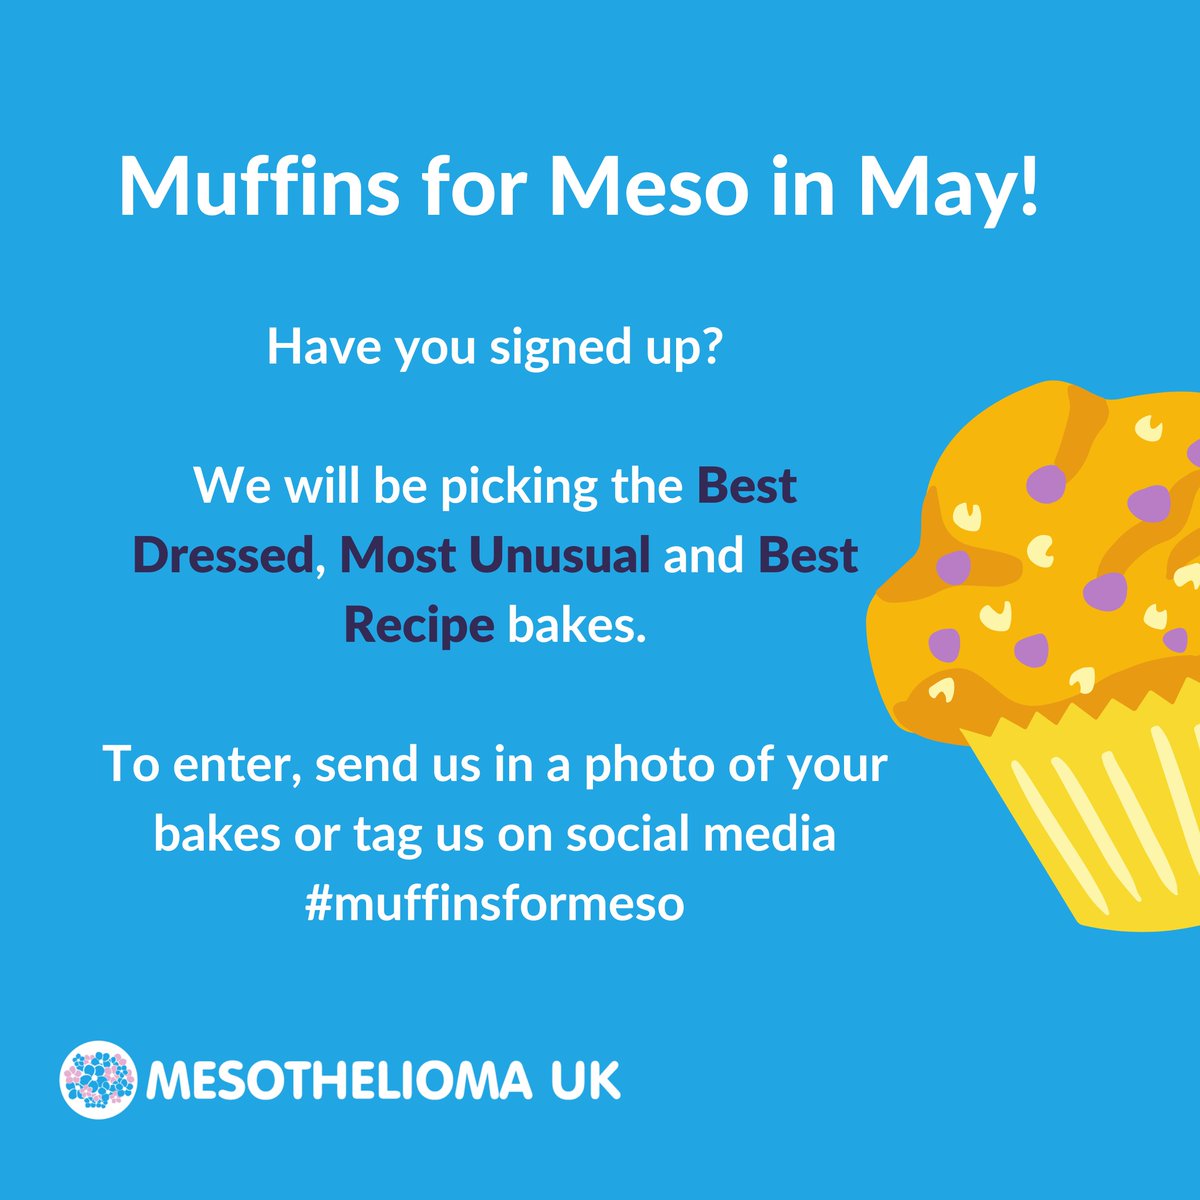 Today is the first day of Muffins for Meso, don't forget to share your bakes and enter our competition! There's still time sign up and get involved 🧁 Sign up here: mesothelioma.uk.com/muffins-for-me… #muffinsformeso #makemesomatter